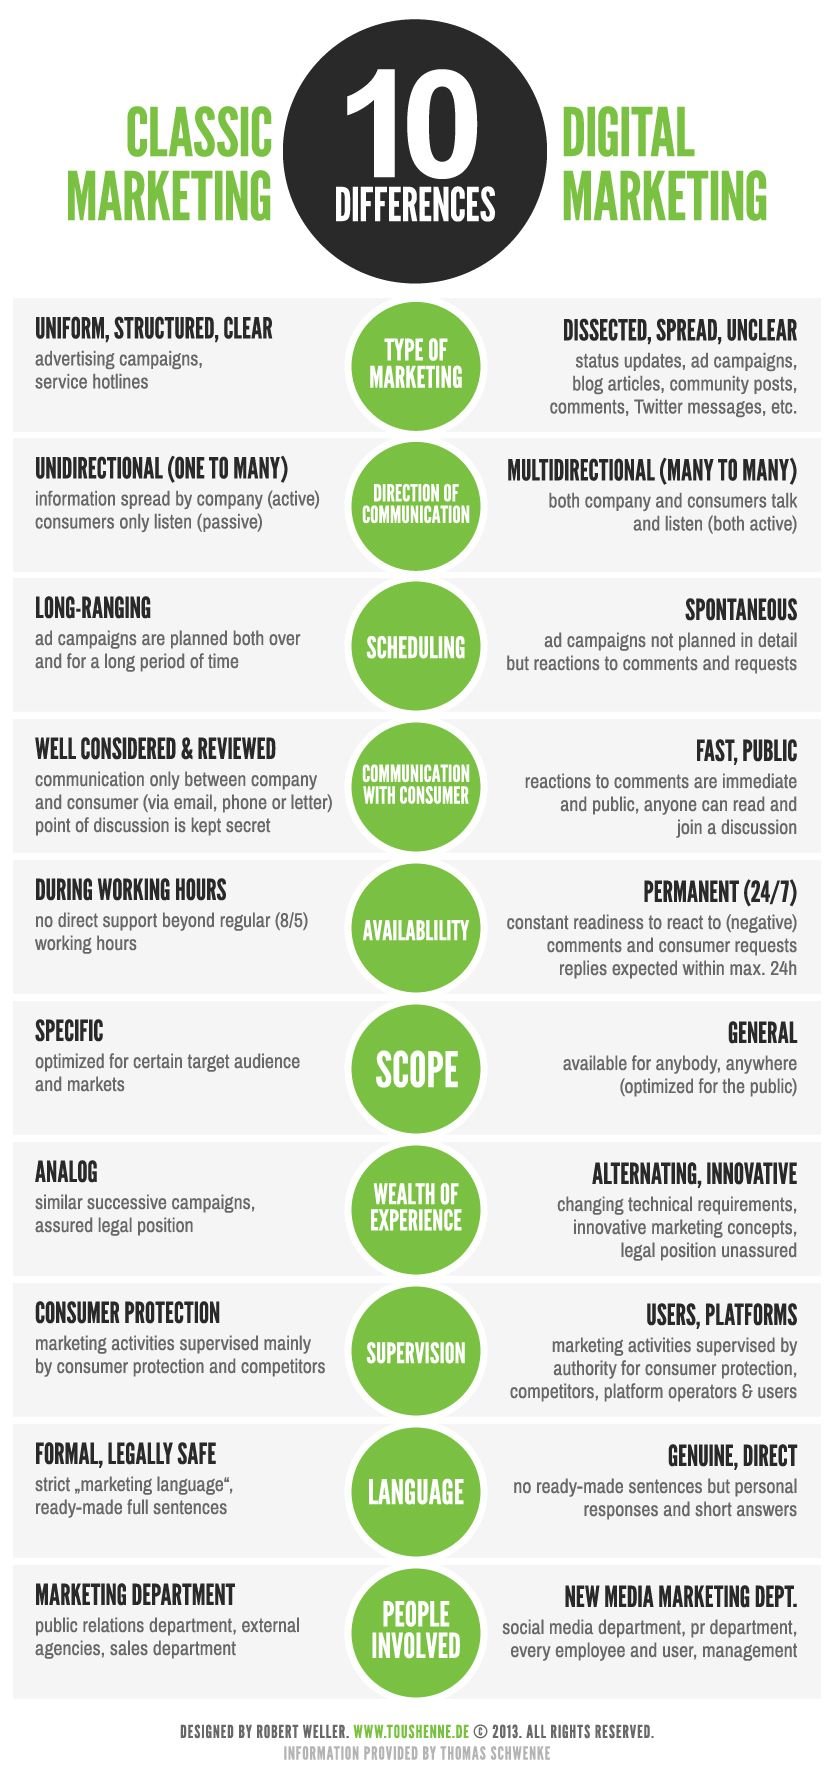 https://social-media-strategy-template.blogspot.com/ #SocialMedia 10 Differences Between Classic And Digital Marketing #infographic